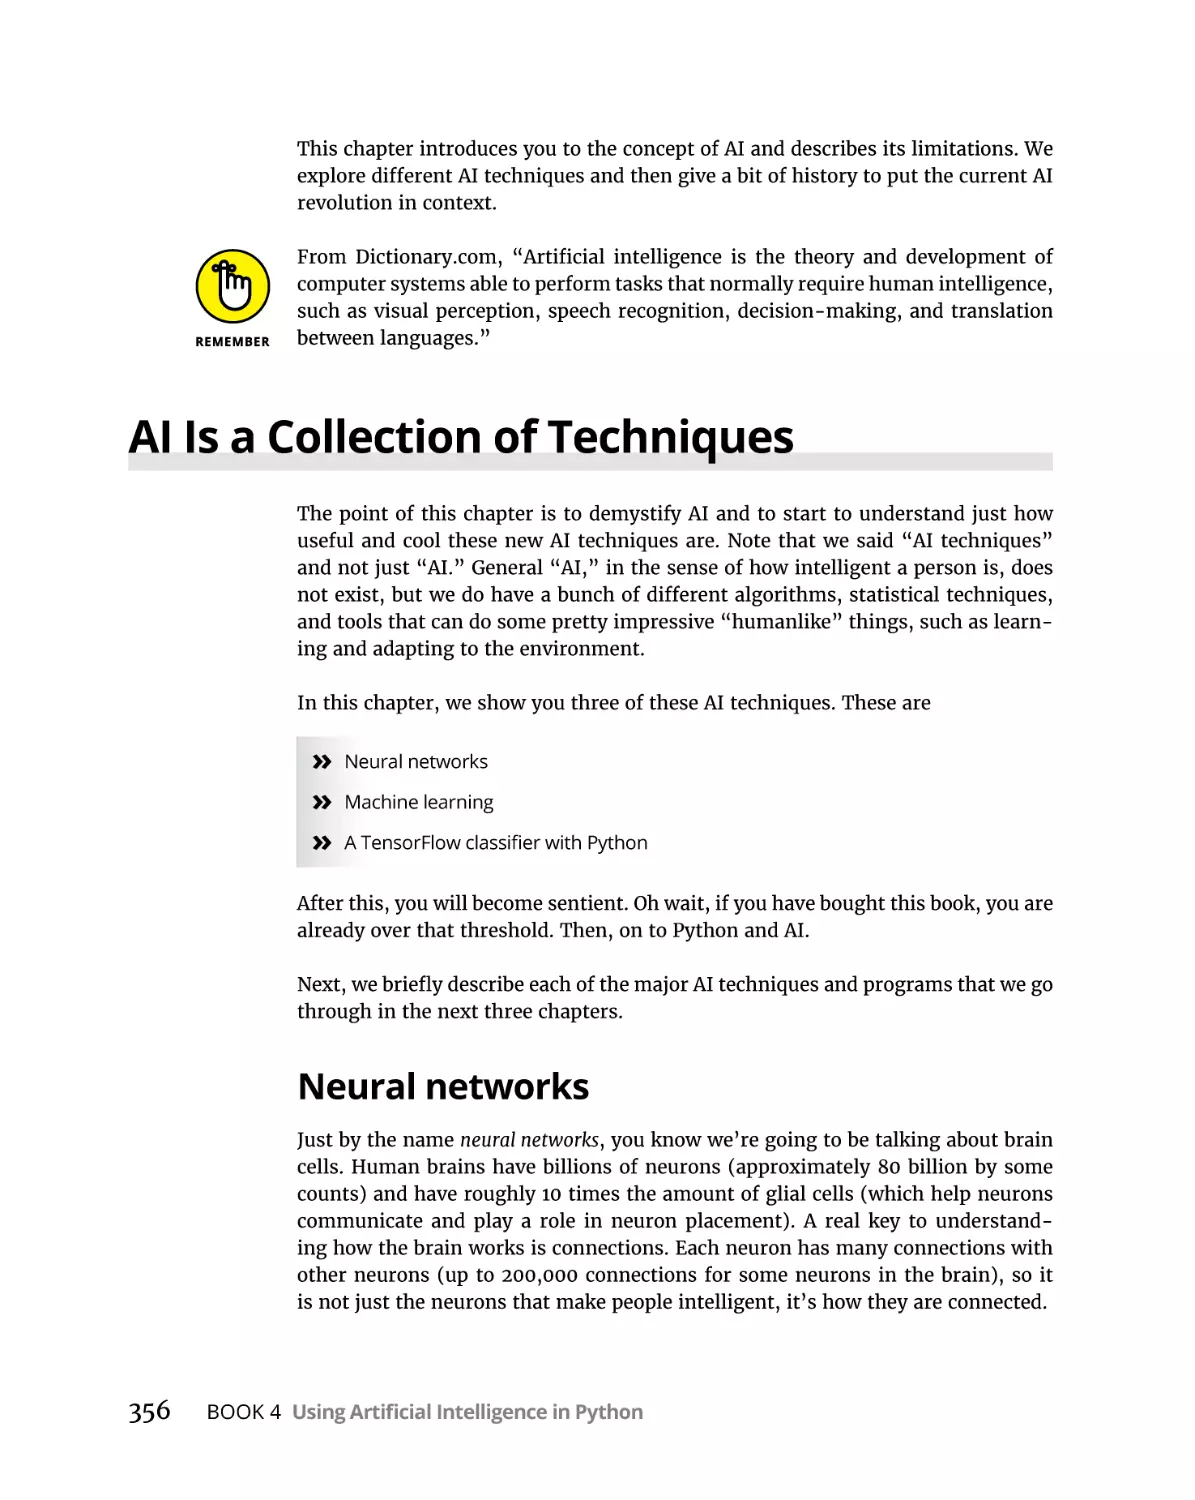 AI Is a Collection of Techniques
Neural networks